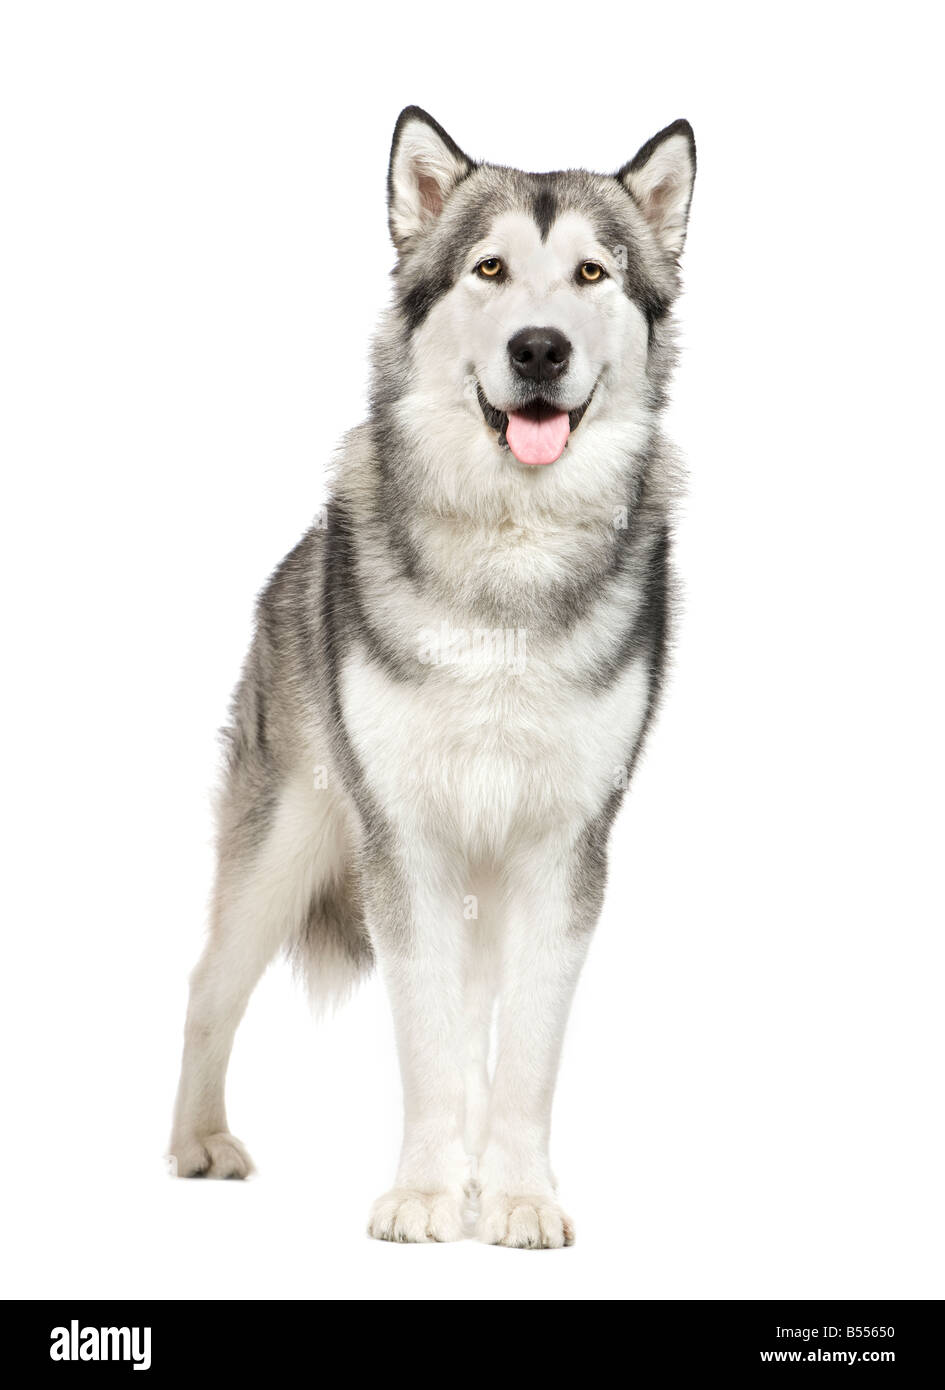 Alaskan Malamute in front of a white background Stock Photo